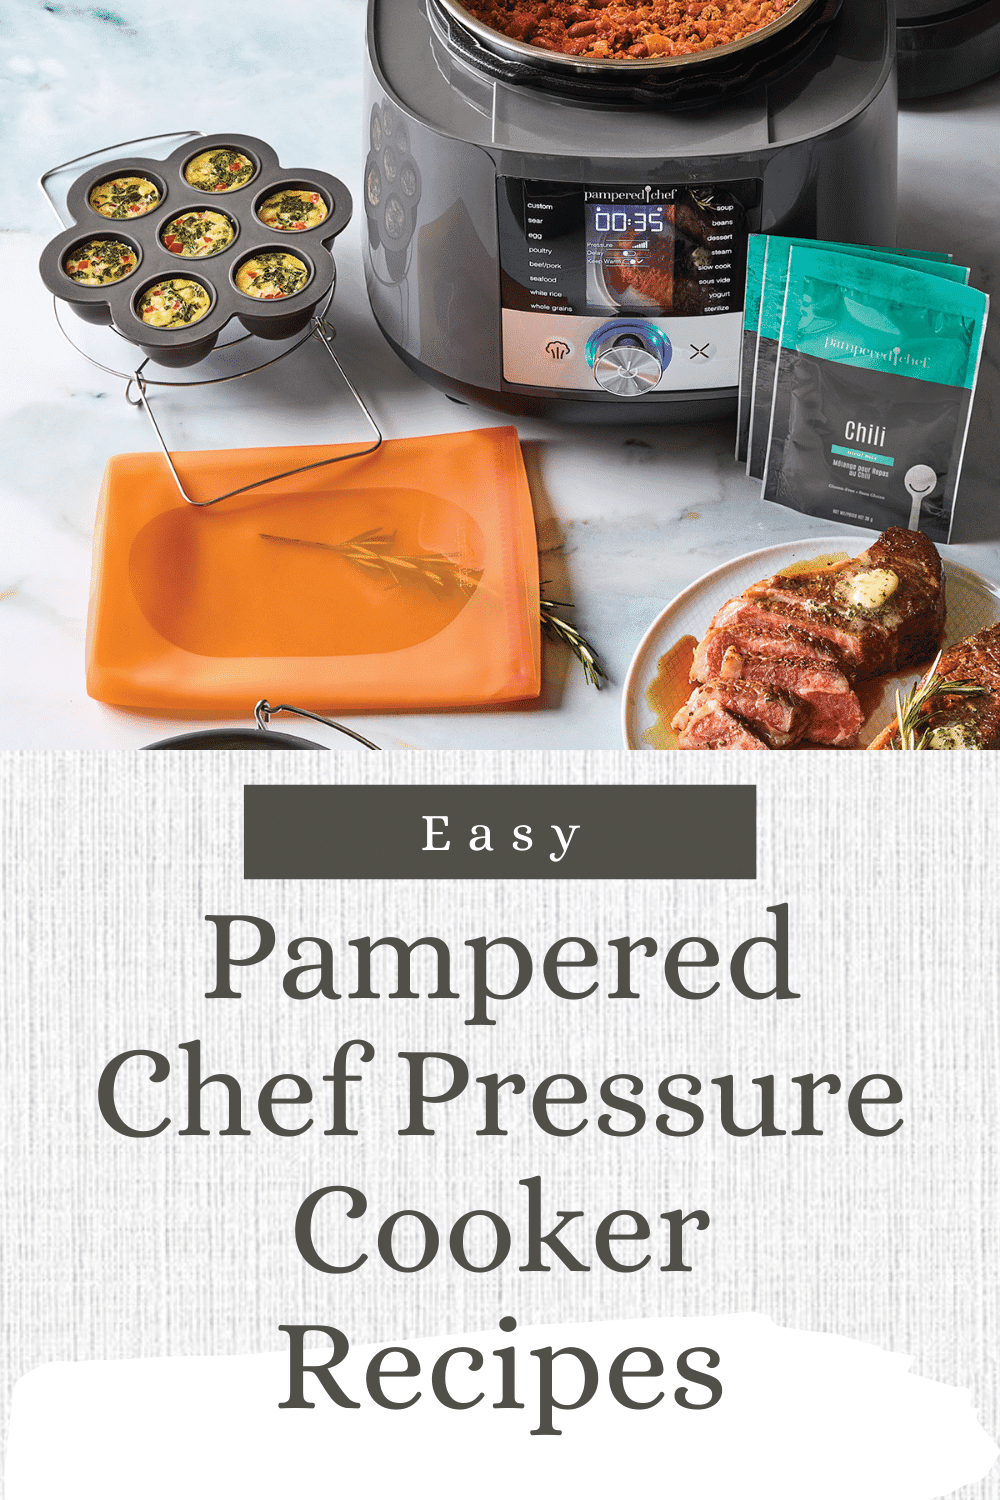 How to Make Pot Roast With Pampered Chef Stoneware